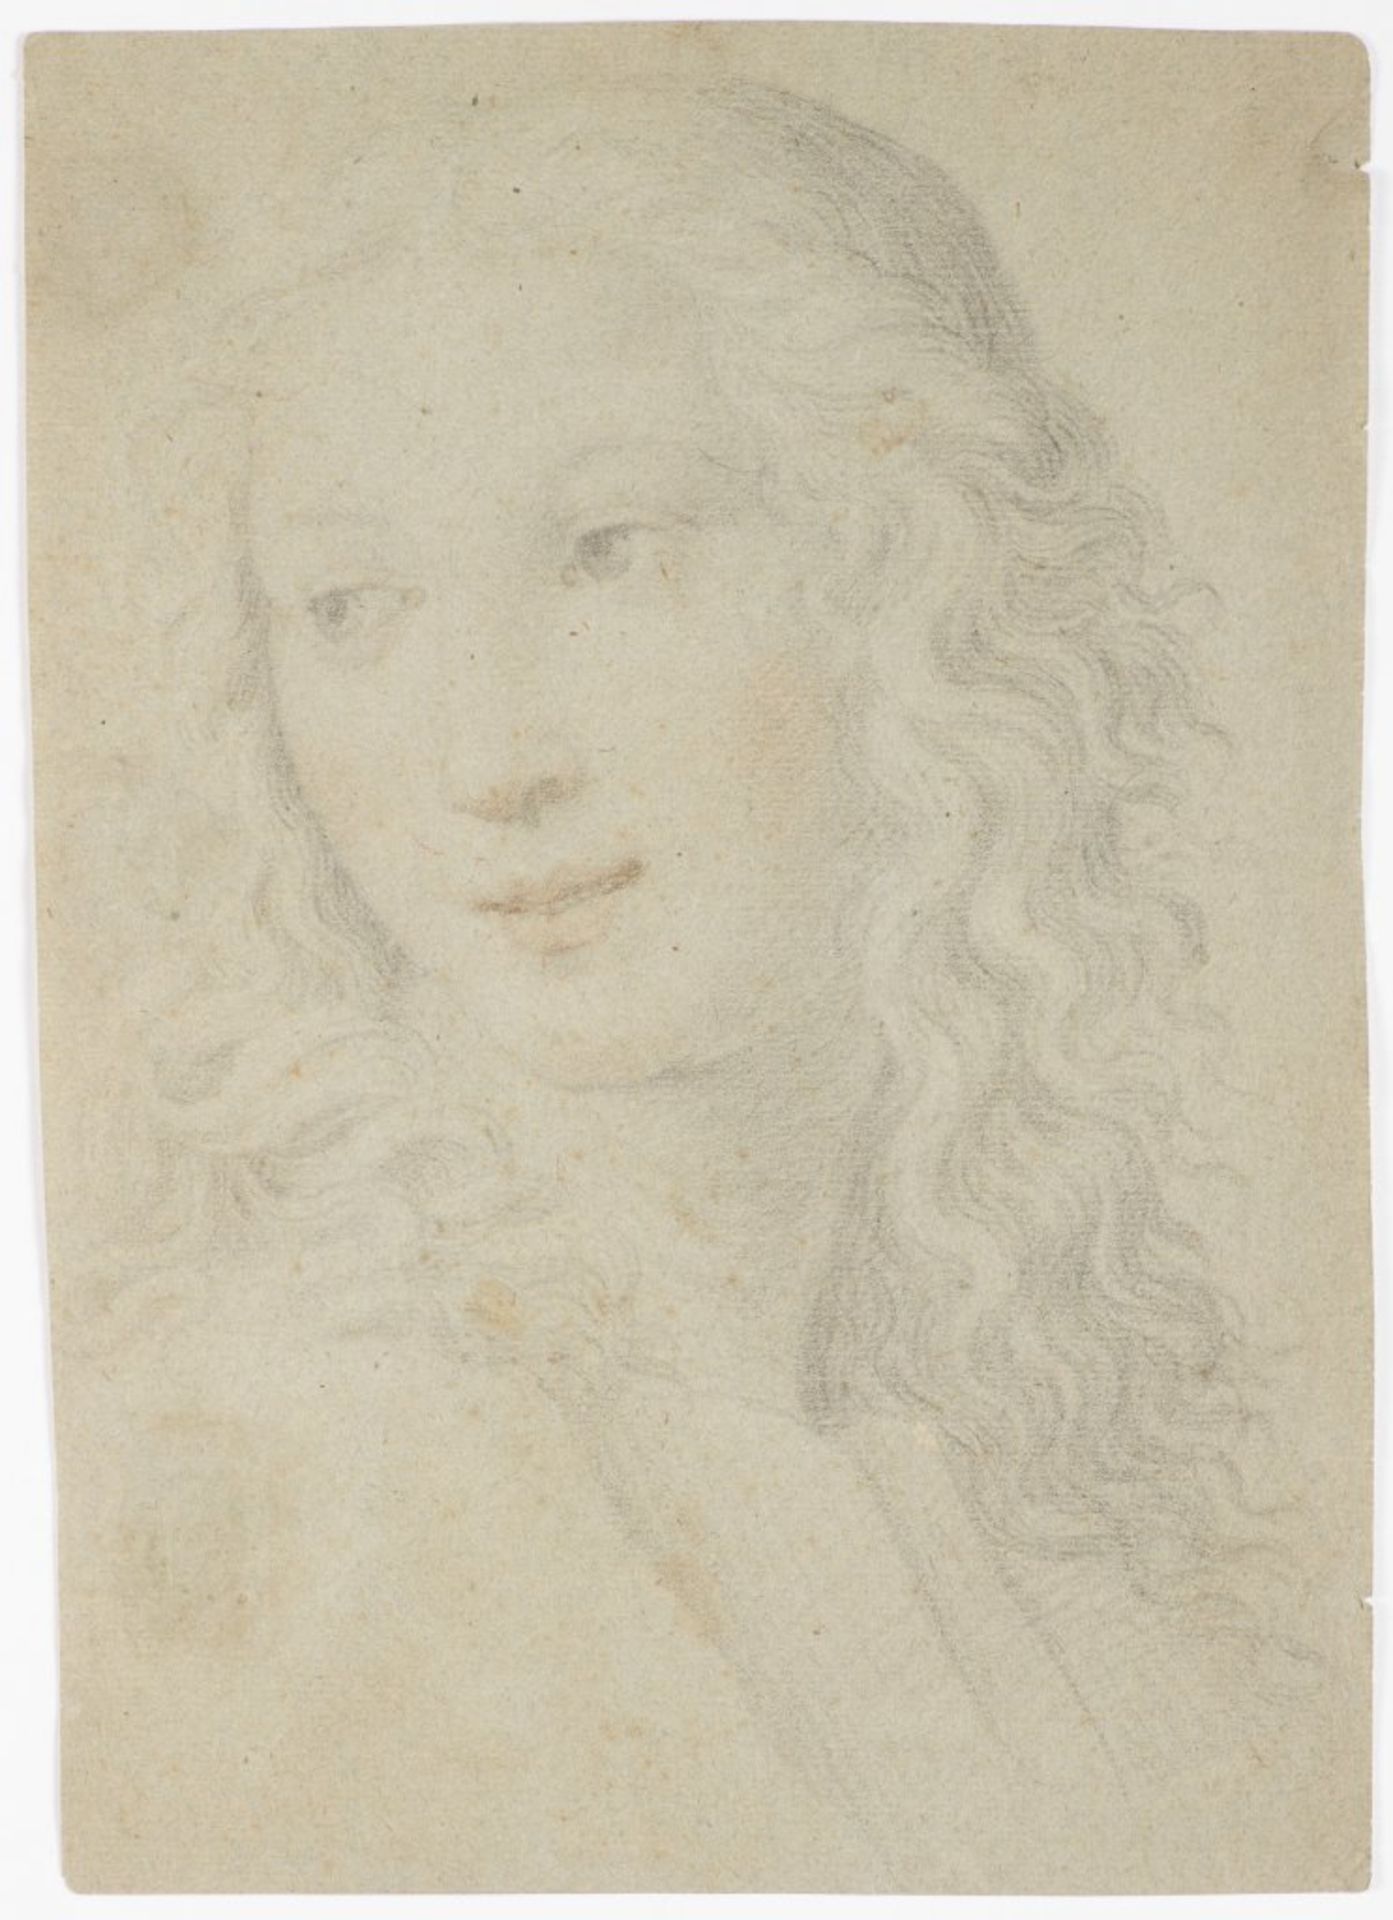 NEZNÁMÝ AUTOR: PORTRAIT OF A WOMAN IN RENAISSANCE STYLE Late 18th/early 19th century Pencil and